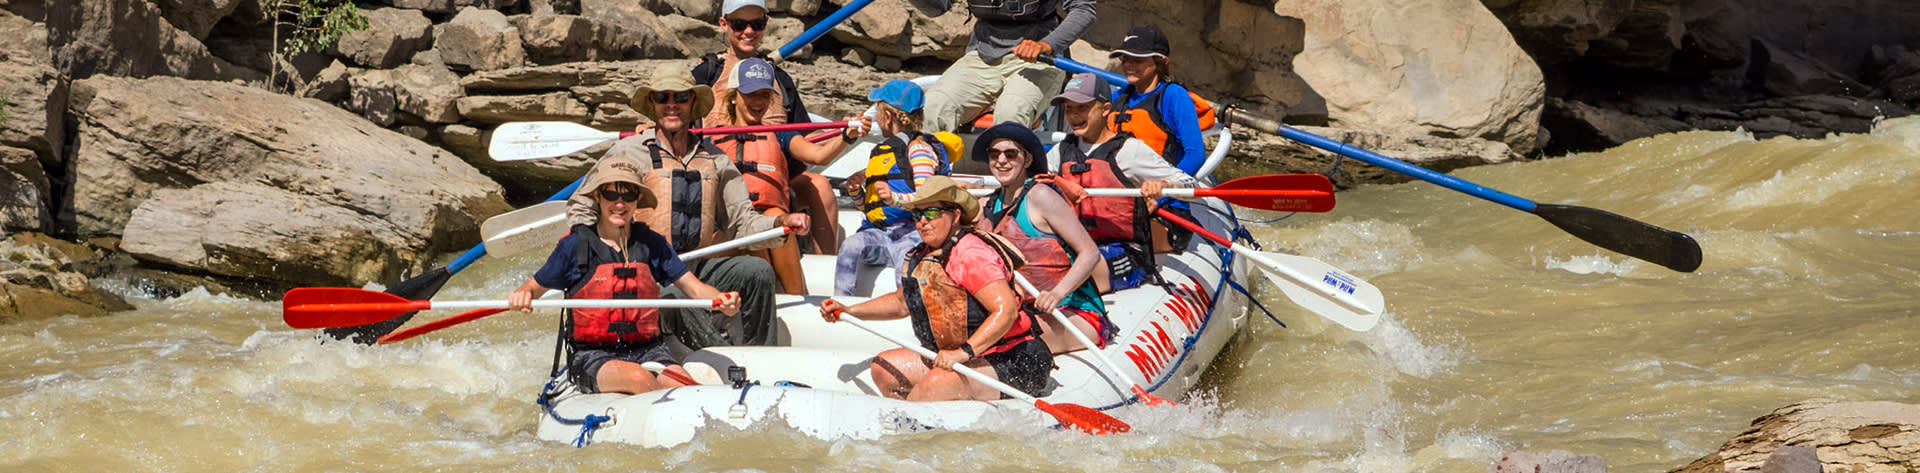 Utah Whitewater Raft Trips Ranked From Mild to Wild